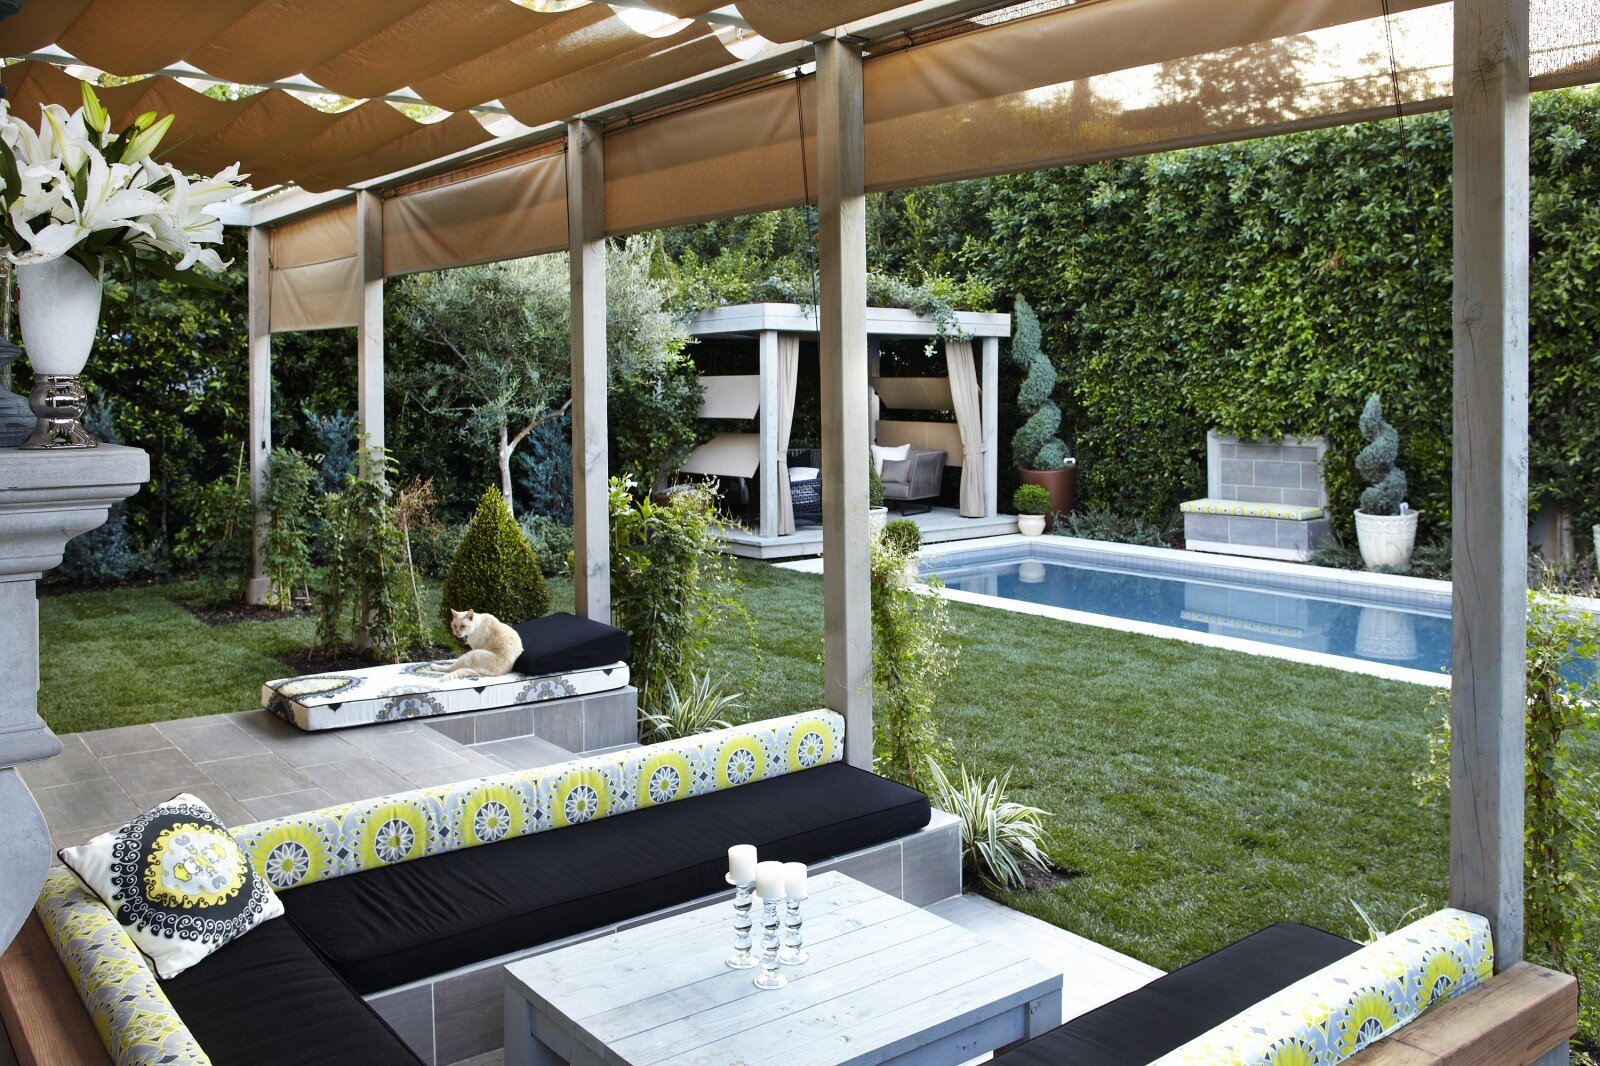 Outdoor living room, a place of complete relaxation